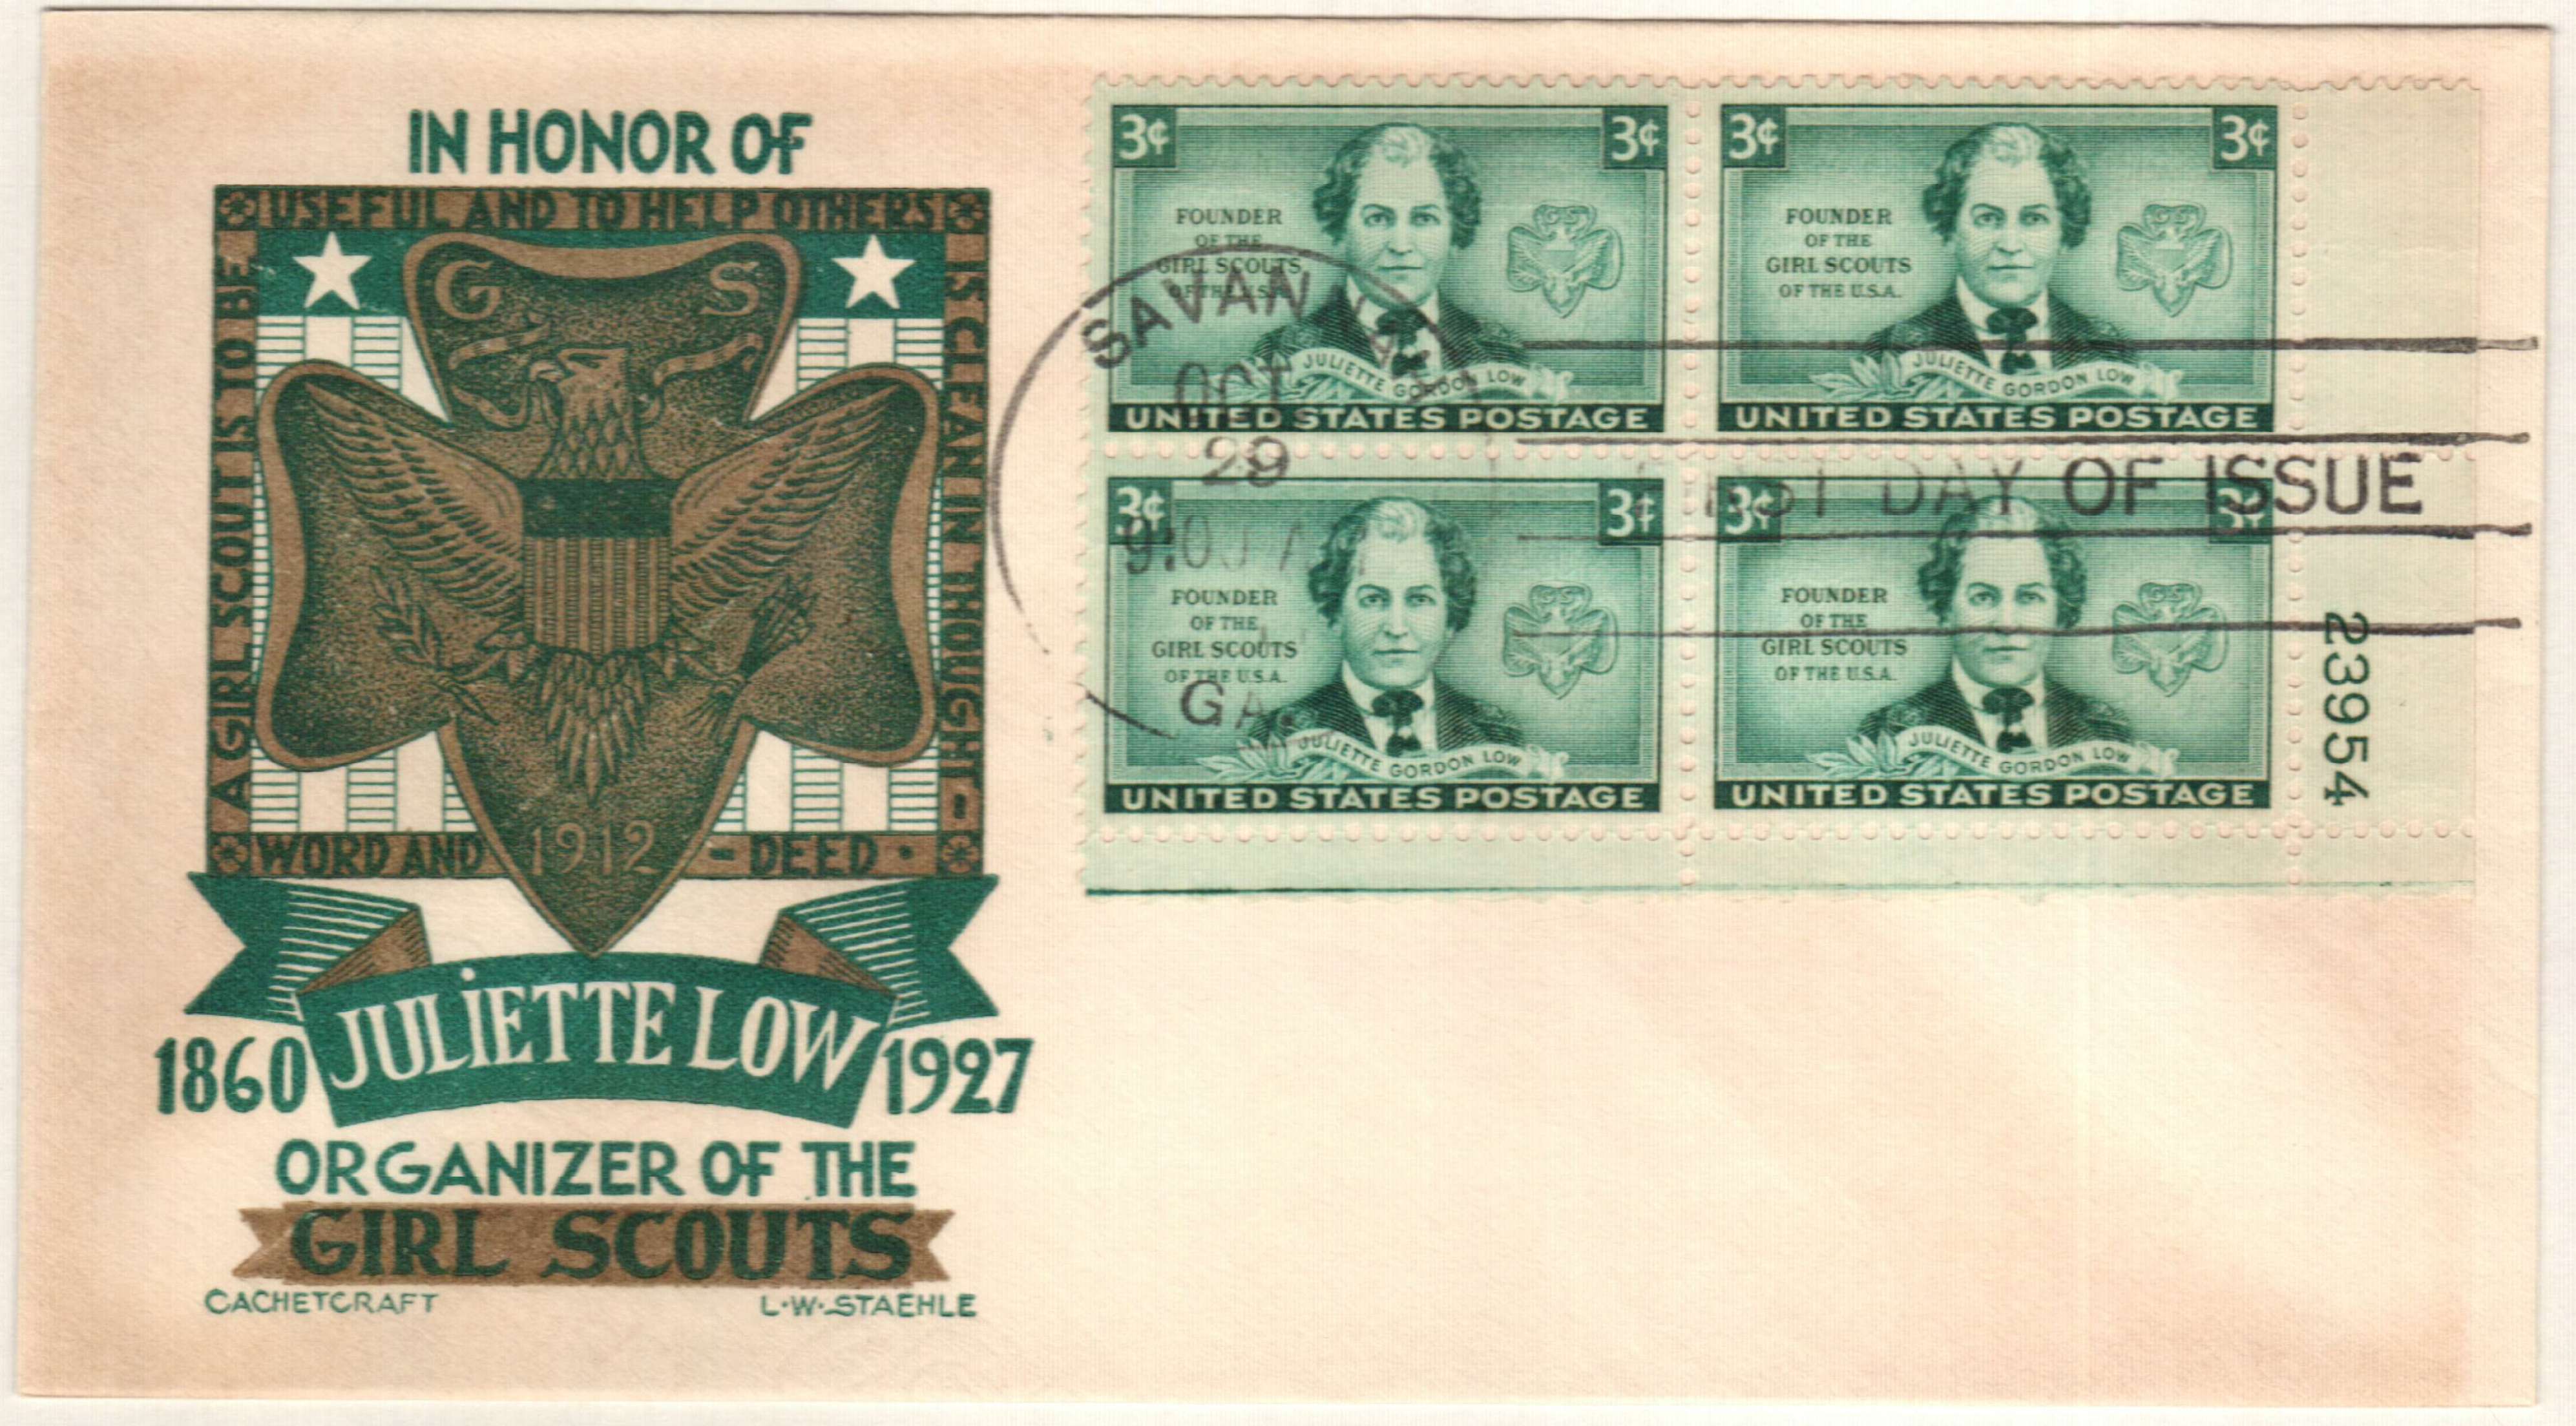 1948 Girl Scouts USA Honoring Juliette Low FDC Envelope with 3 cent GS  Stamp and special